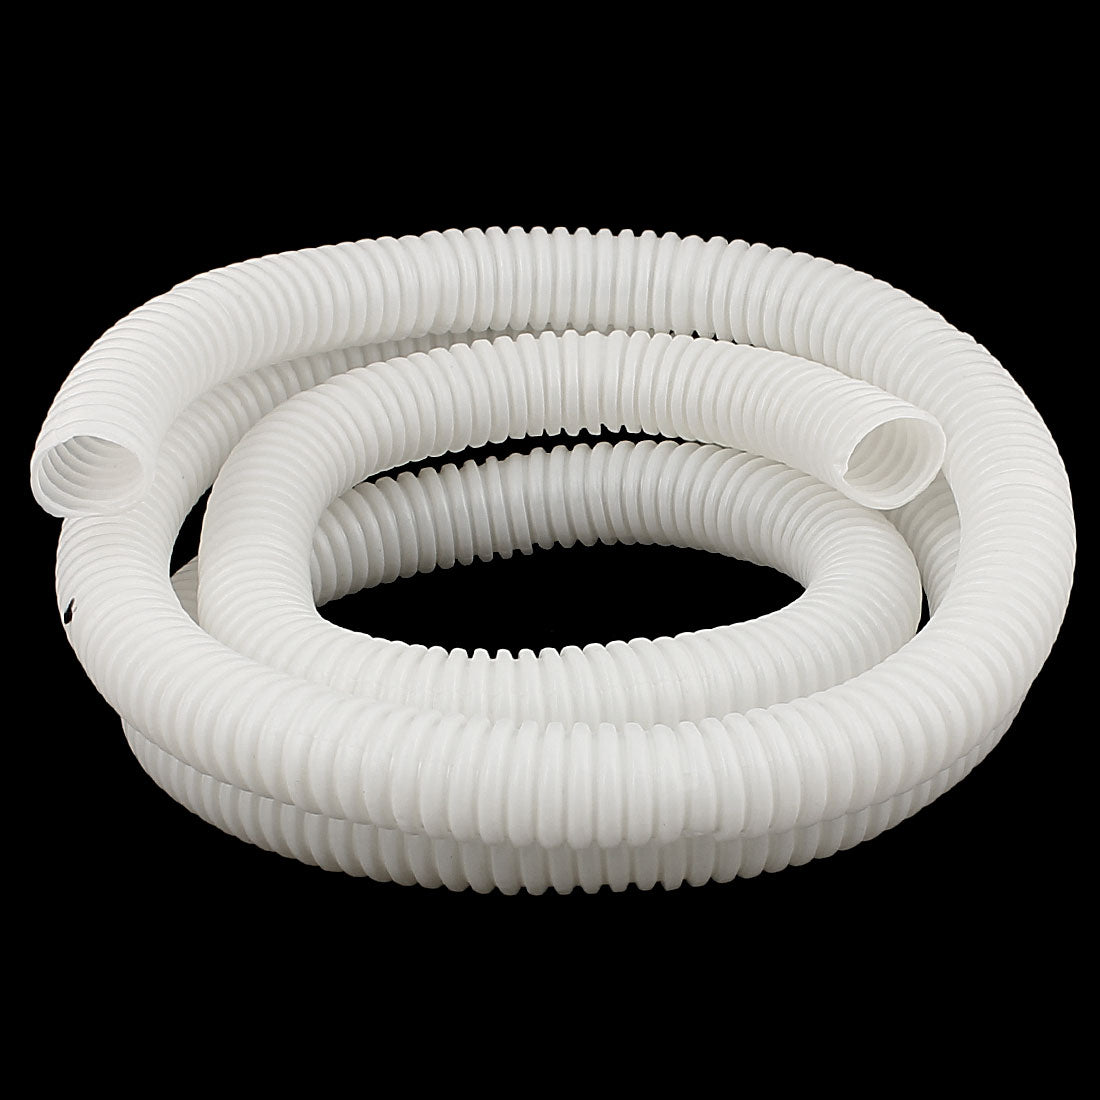 uxcell Uxcell 1.5 M 16 x 19 mm Plastic Corrugated Conduit Tube for Garden,Office White